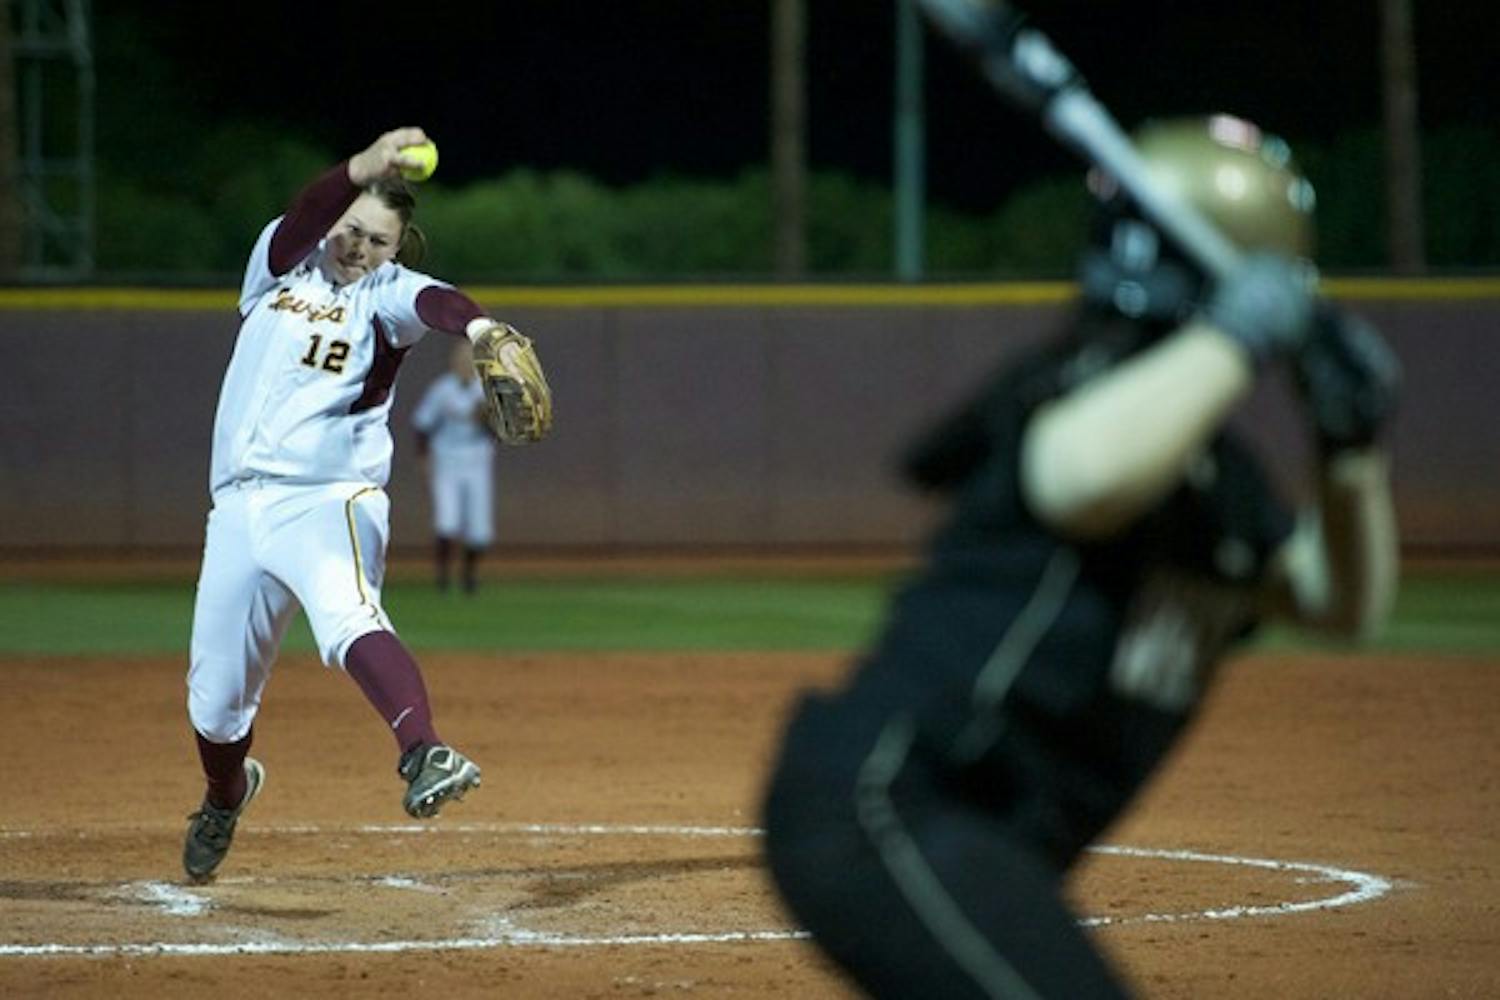 Pac-10 Award Sweep: ASU freshman pitcher Dallas Escobedo pushes off the rubber during the Sun Devils’ game against Western Michigan on Feb. 10 in Tempe. Escobedo and teammate Kaylyn Castillo both won Pac-10 awards for their play in the Sun Devils’ sweep over UA. (Photo by Michael Arellano)